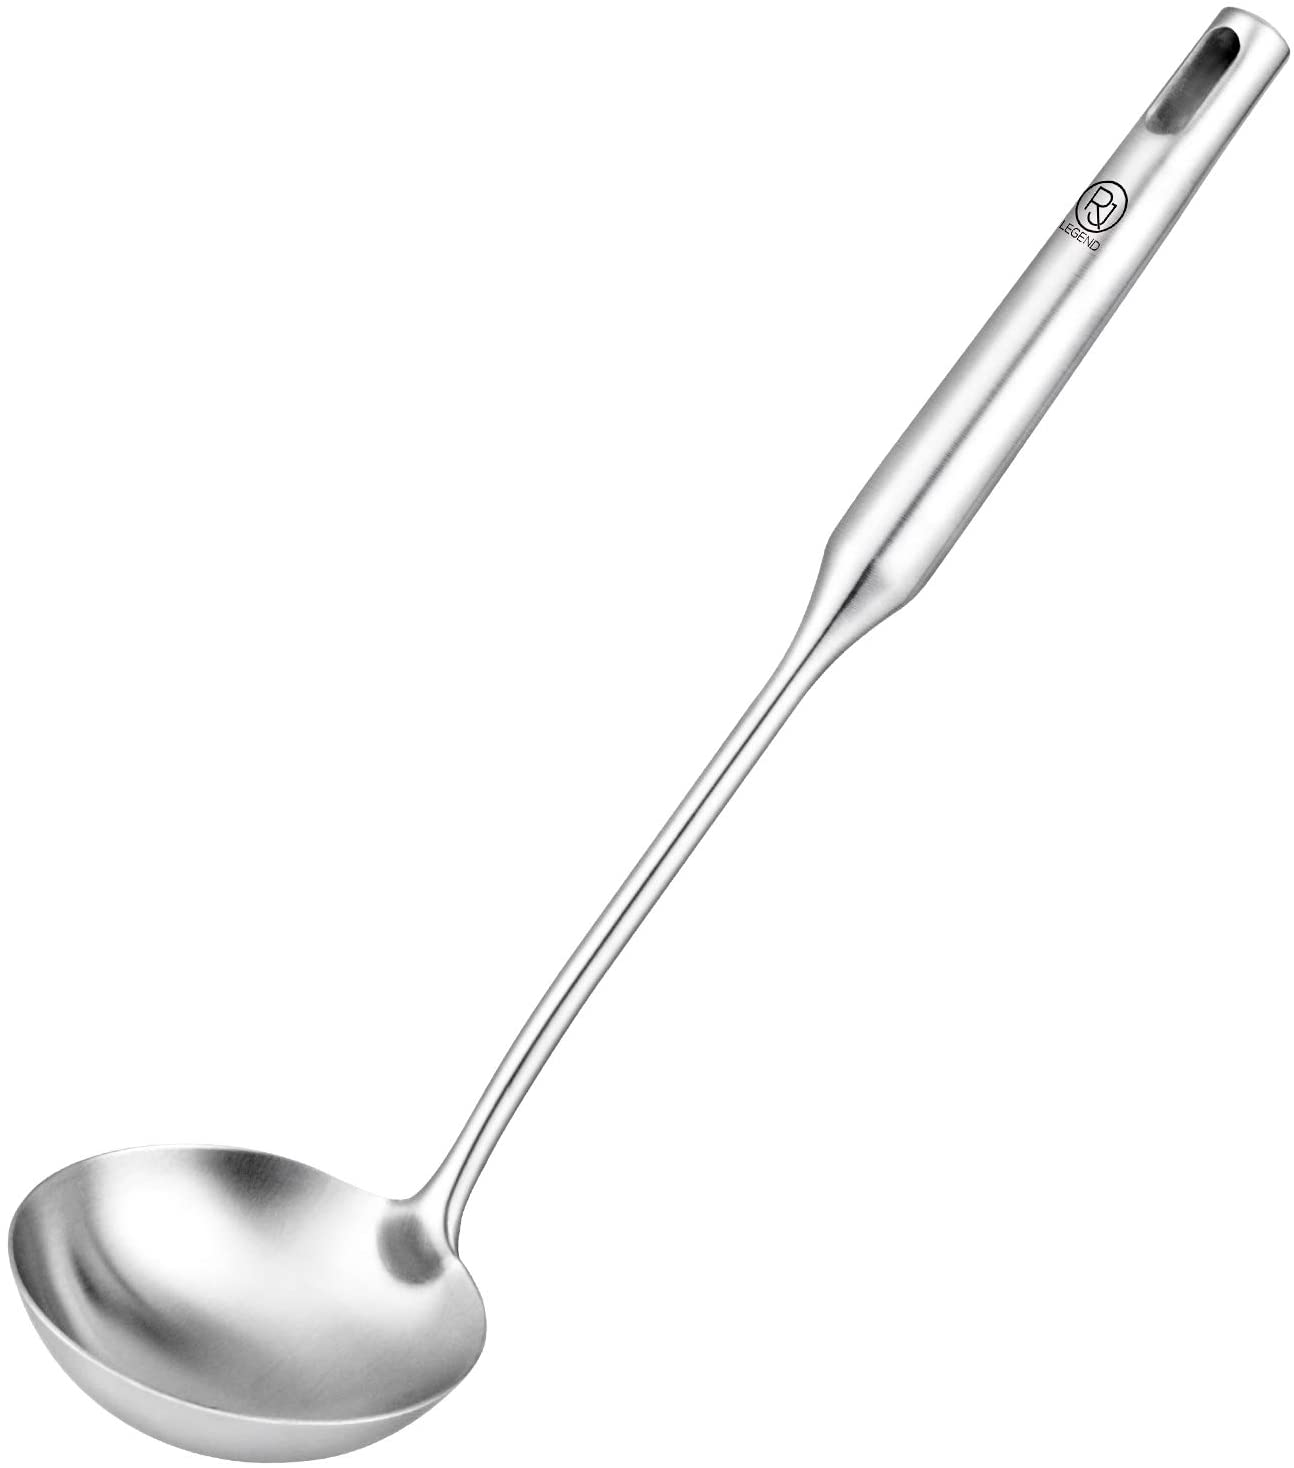 RJ Legend Kitchen Gadget Food Grade 304 Stainless Steel 14.2 In. Length/3.7 In. Diameter Soup Ladle with Ergonomic Rounded Handle, Silver - image 1 of 5